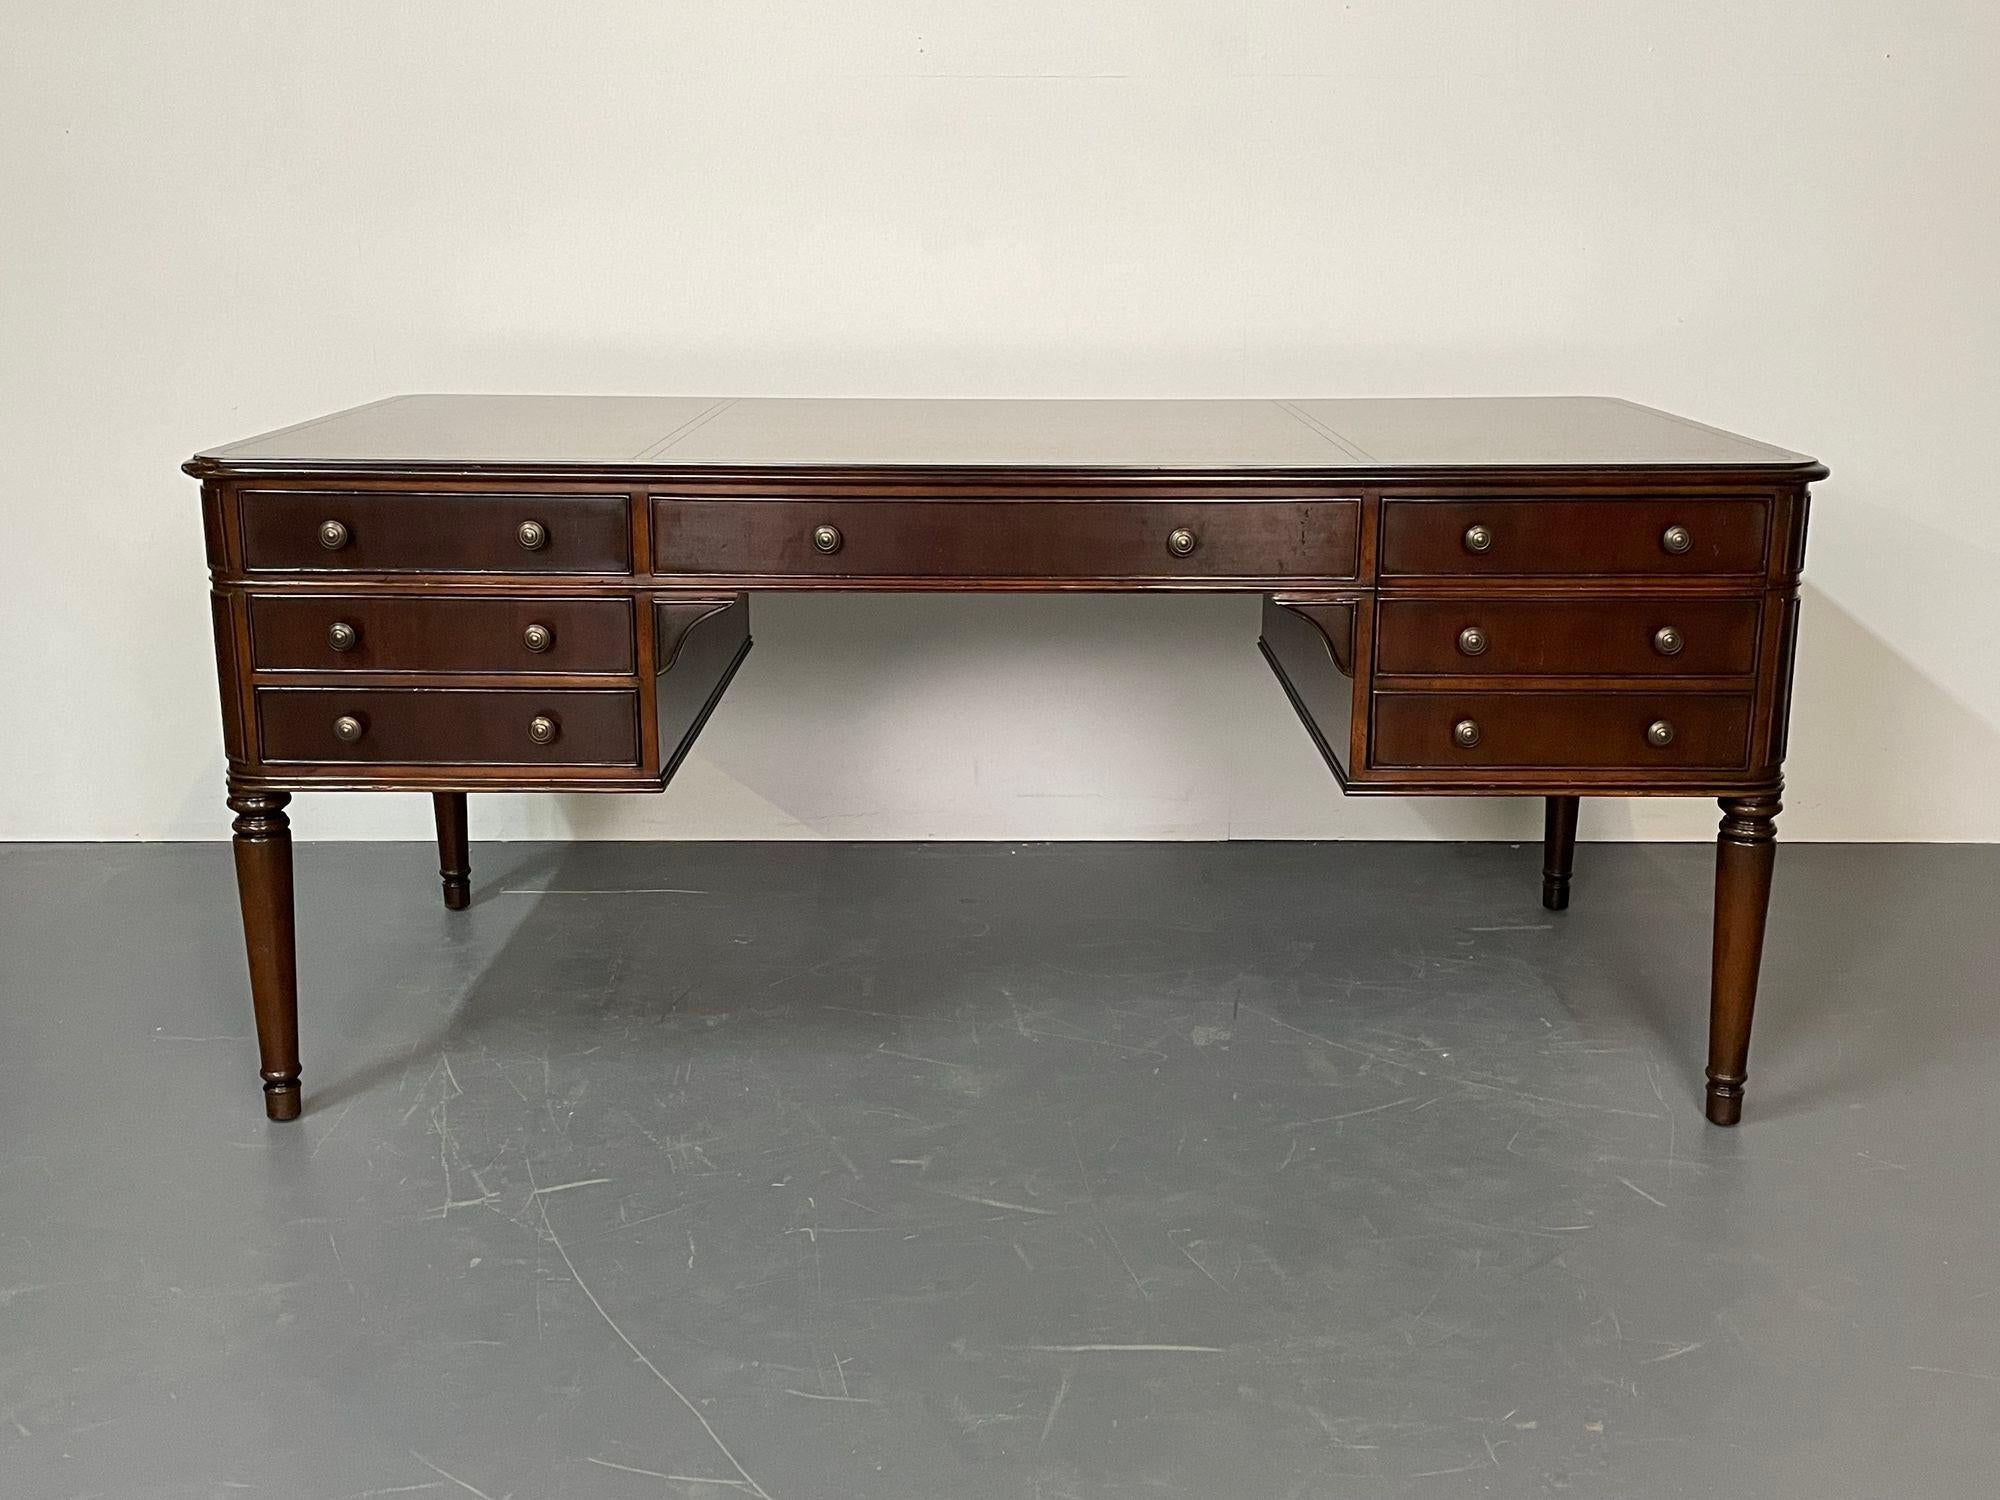 Large mahogany executive partners desk by baker, writing table in the Georgian Fashion. 
A stunning new Baker mahogany partners desk having full drawer and file sides for a compatible working partnership. A large center drawer flanked by side